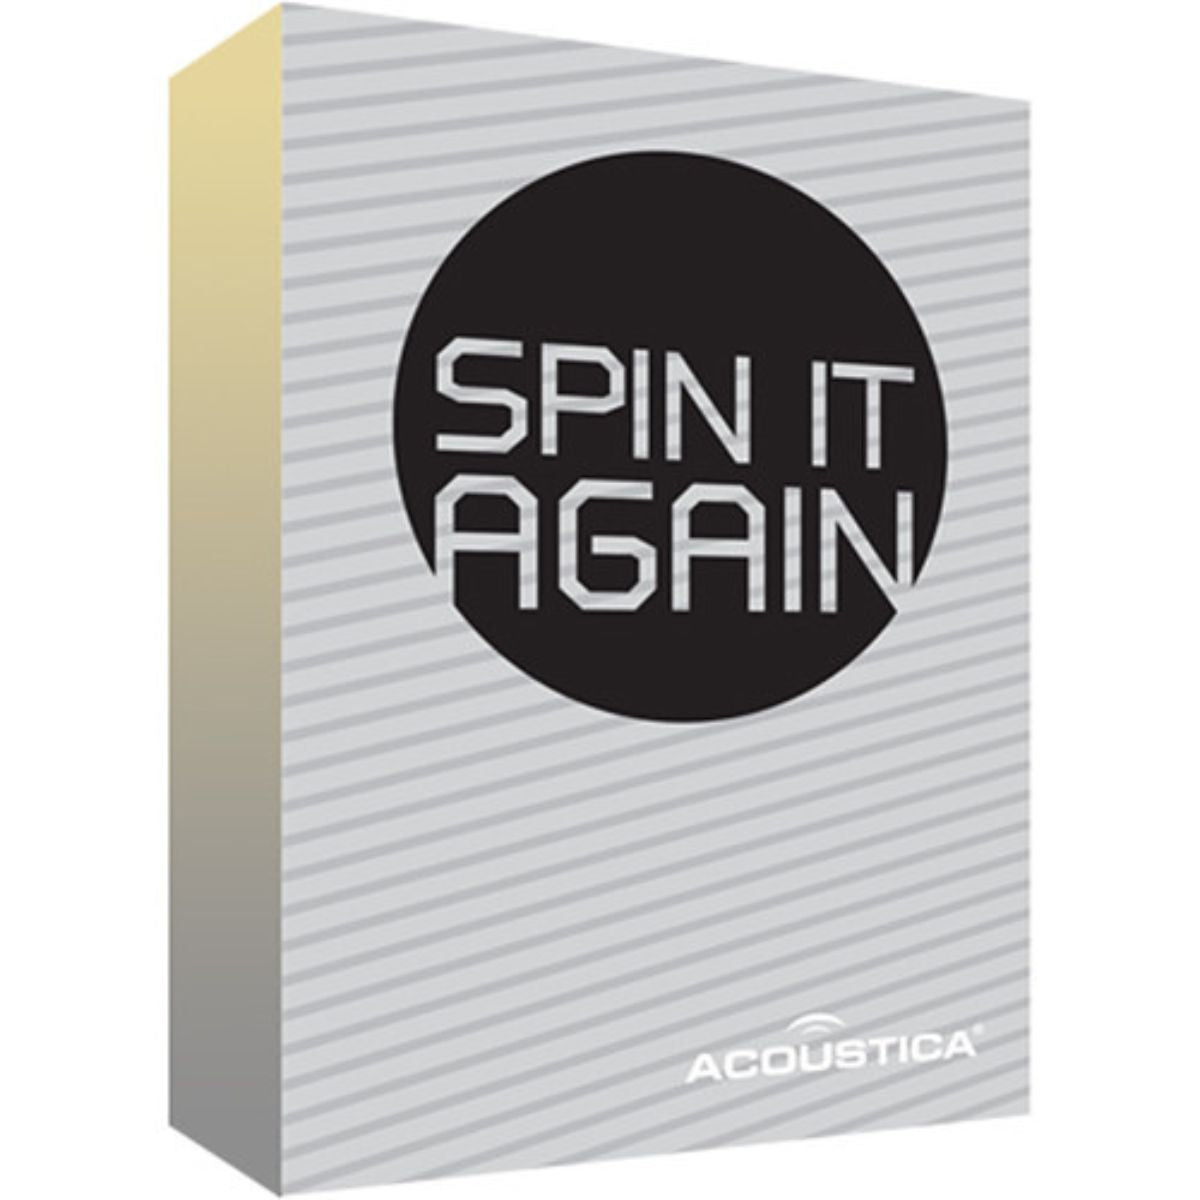 Acoustica Spin It Again Analog Restoration and Archival Software